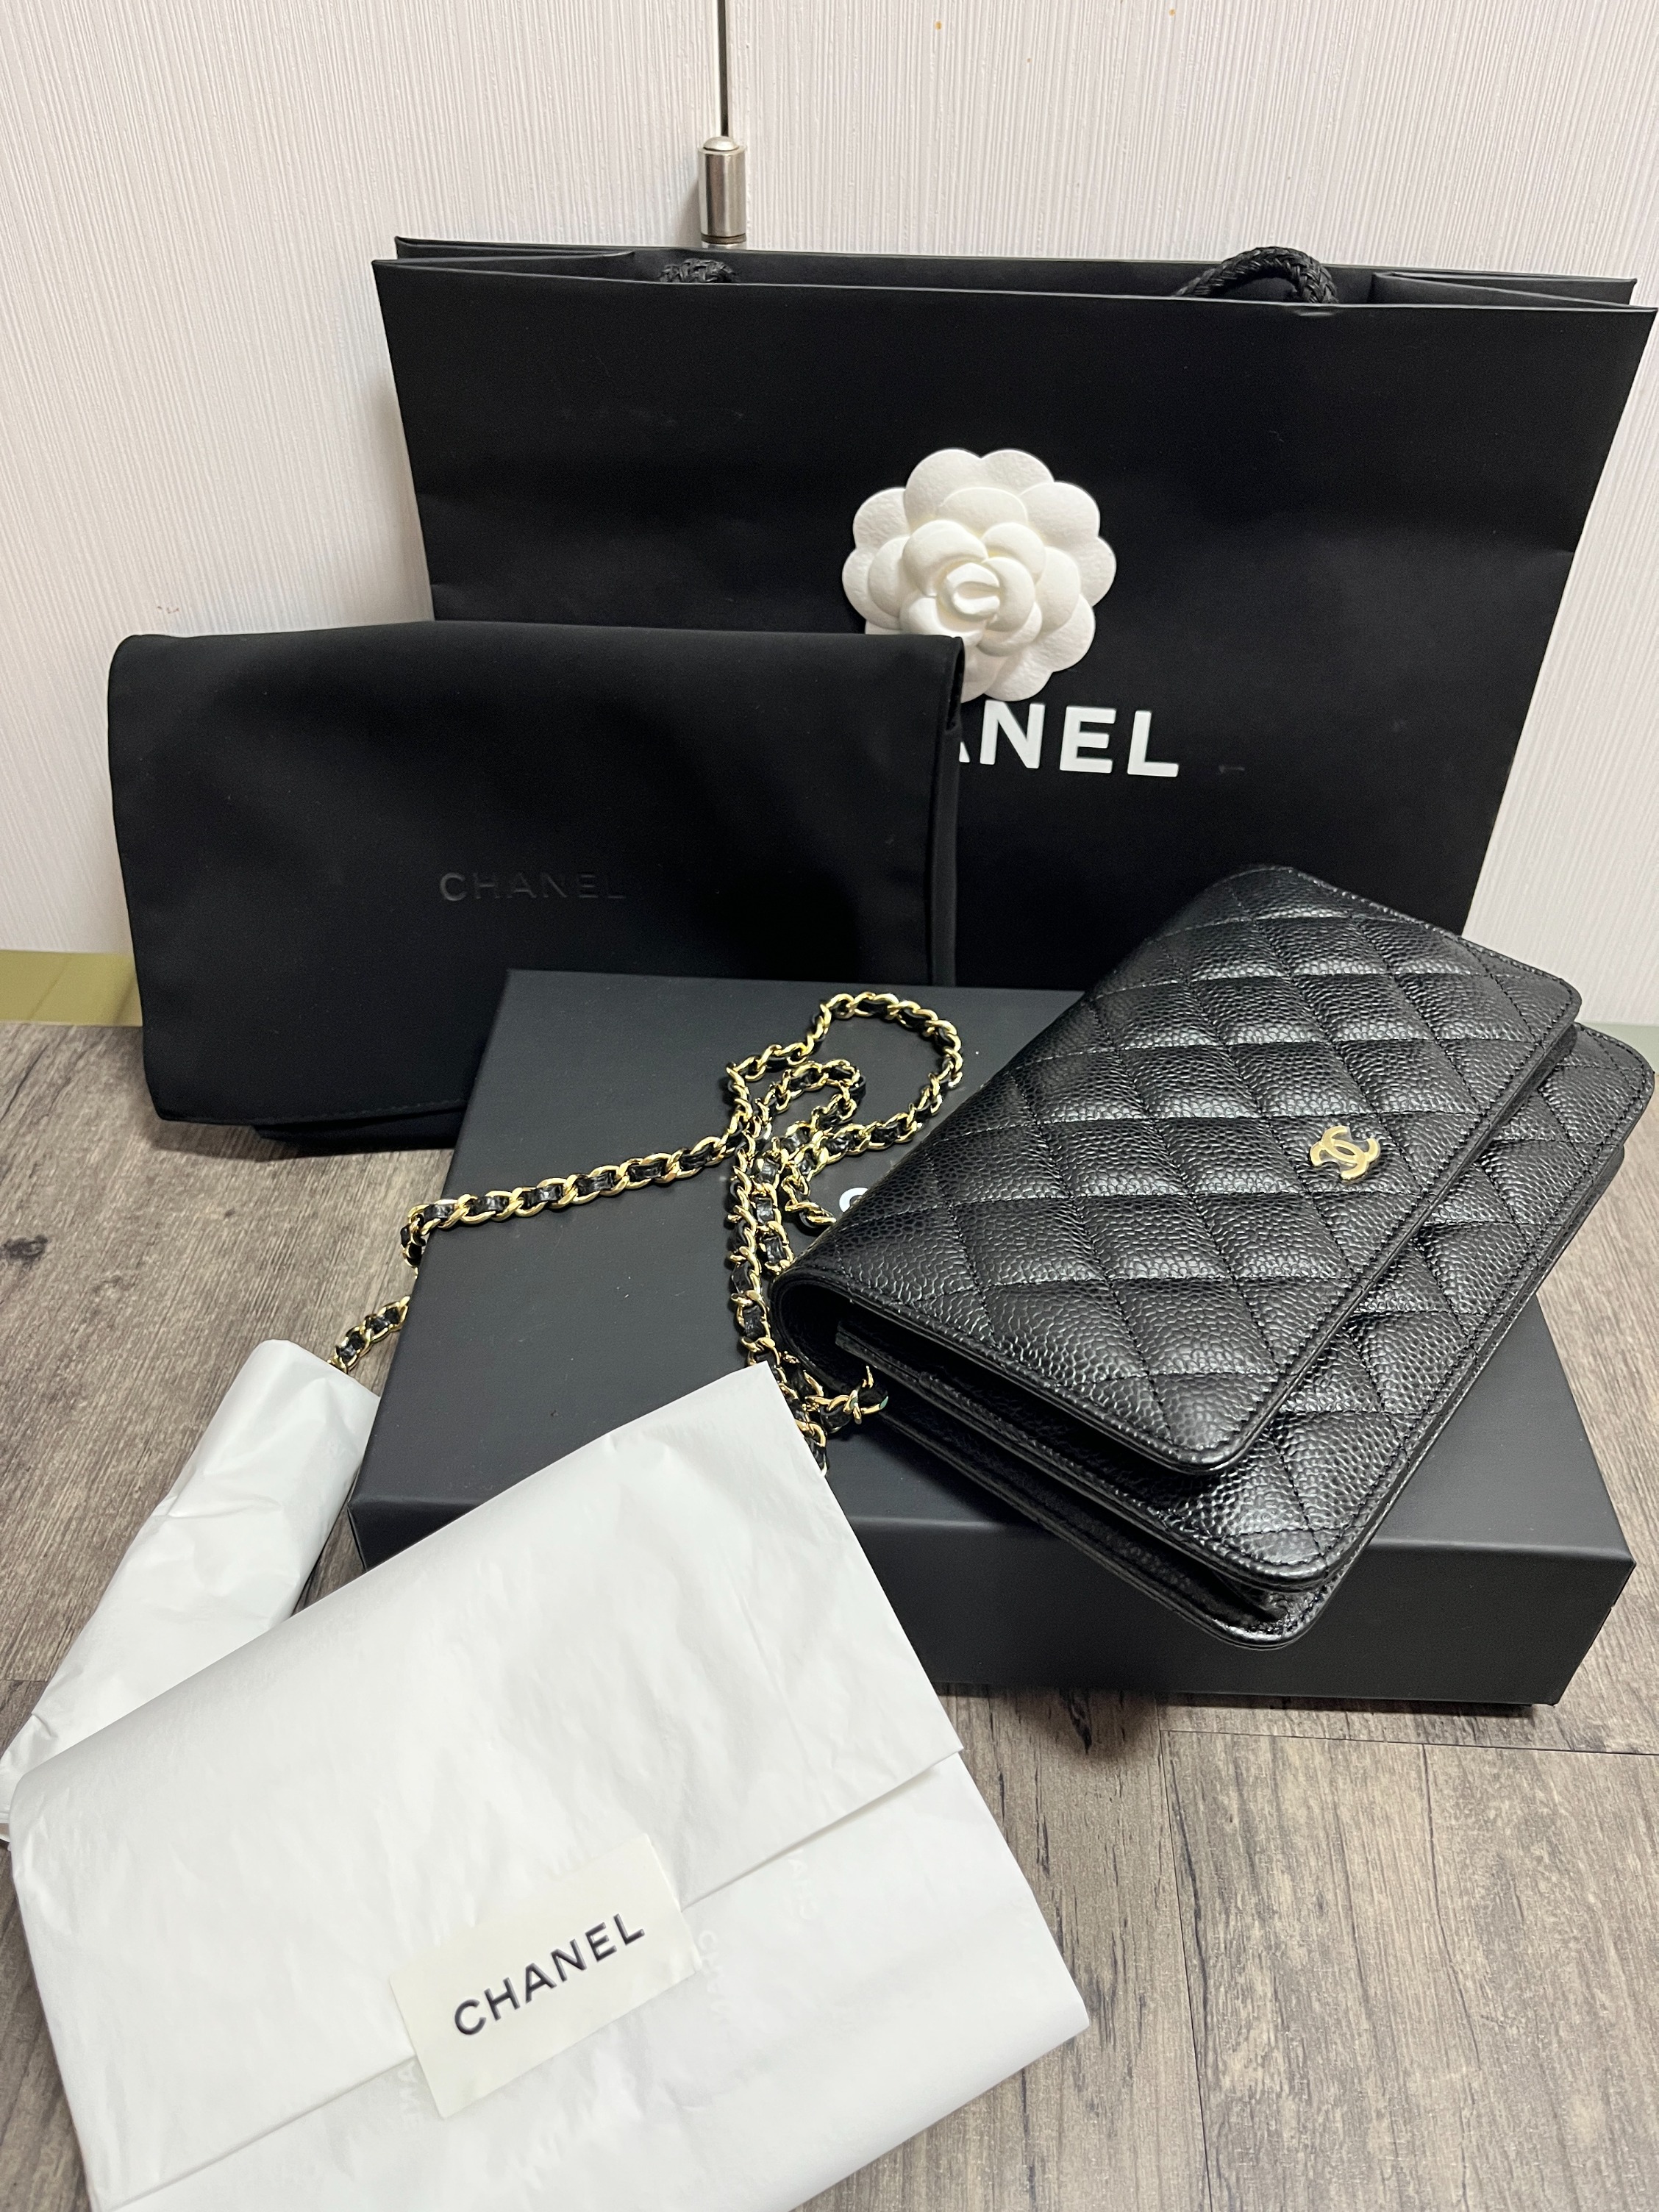 New Chanel Black Caviar Classic Wallet on Chain WOC Flap Bag GHW